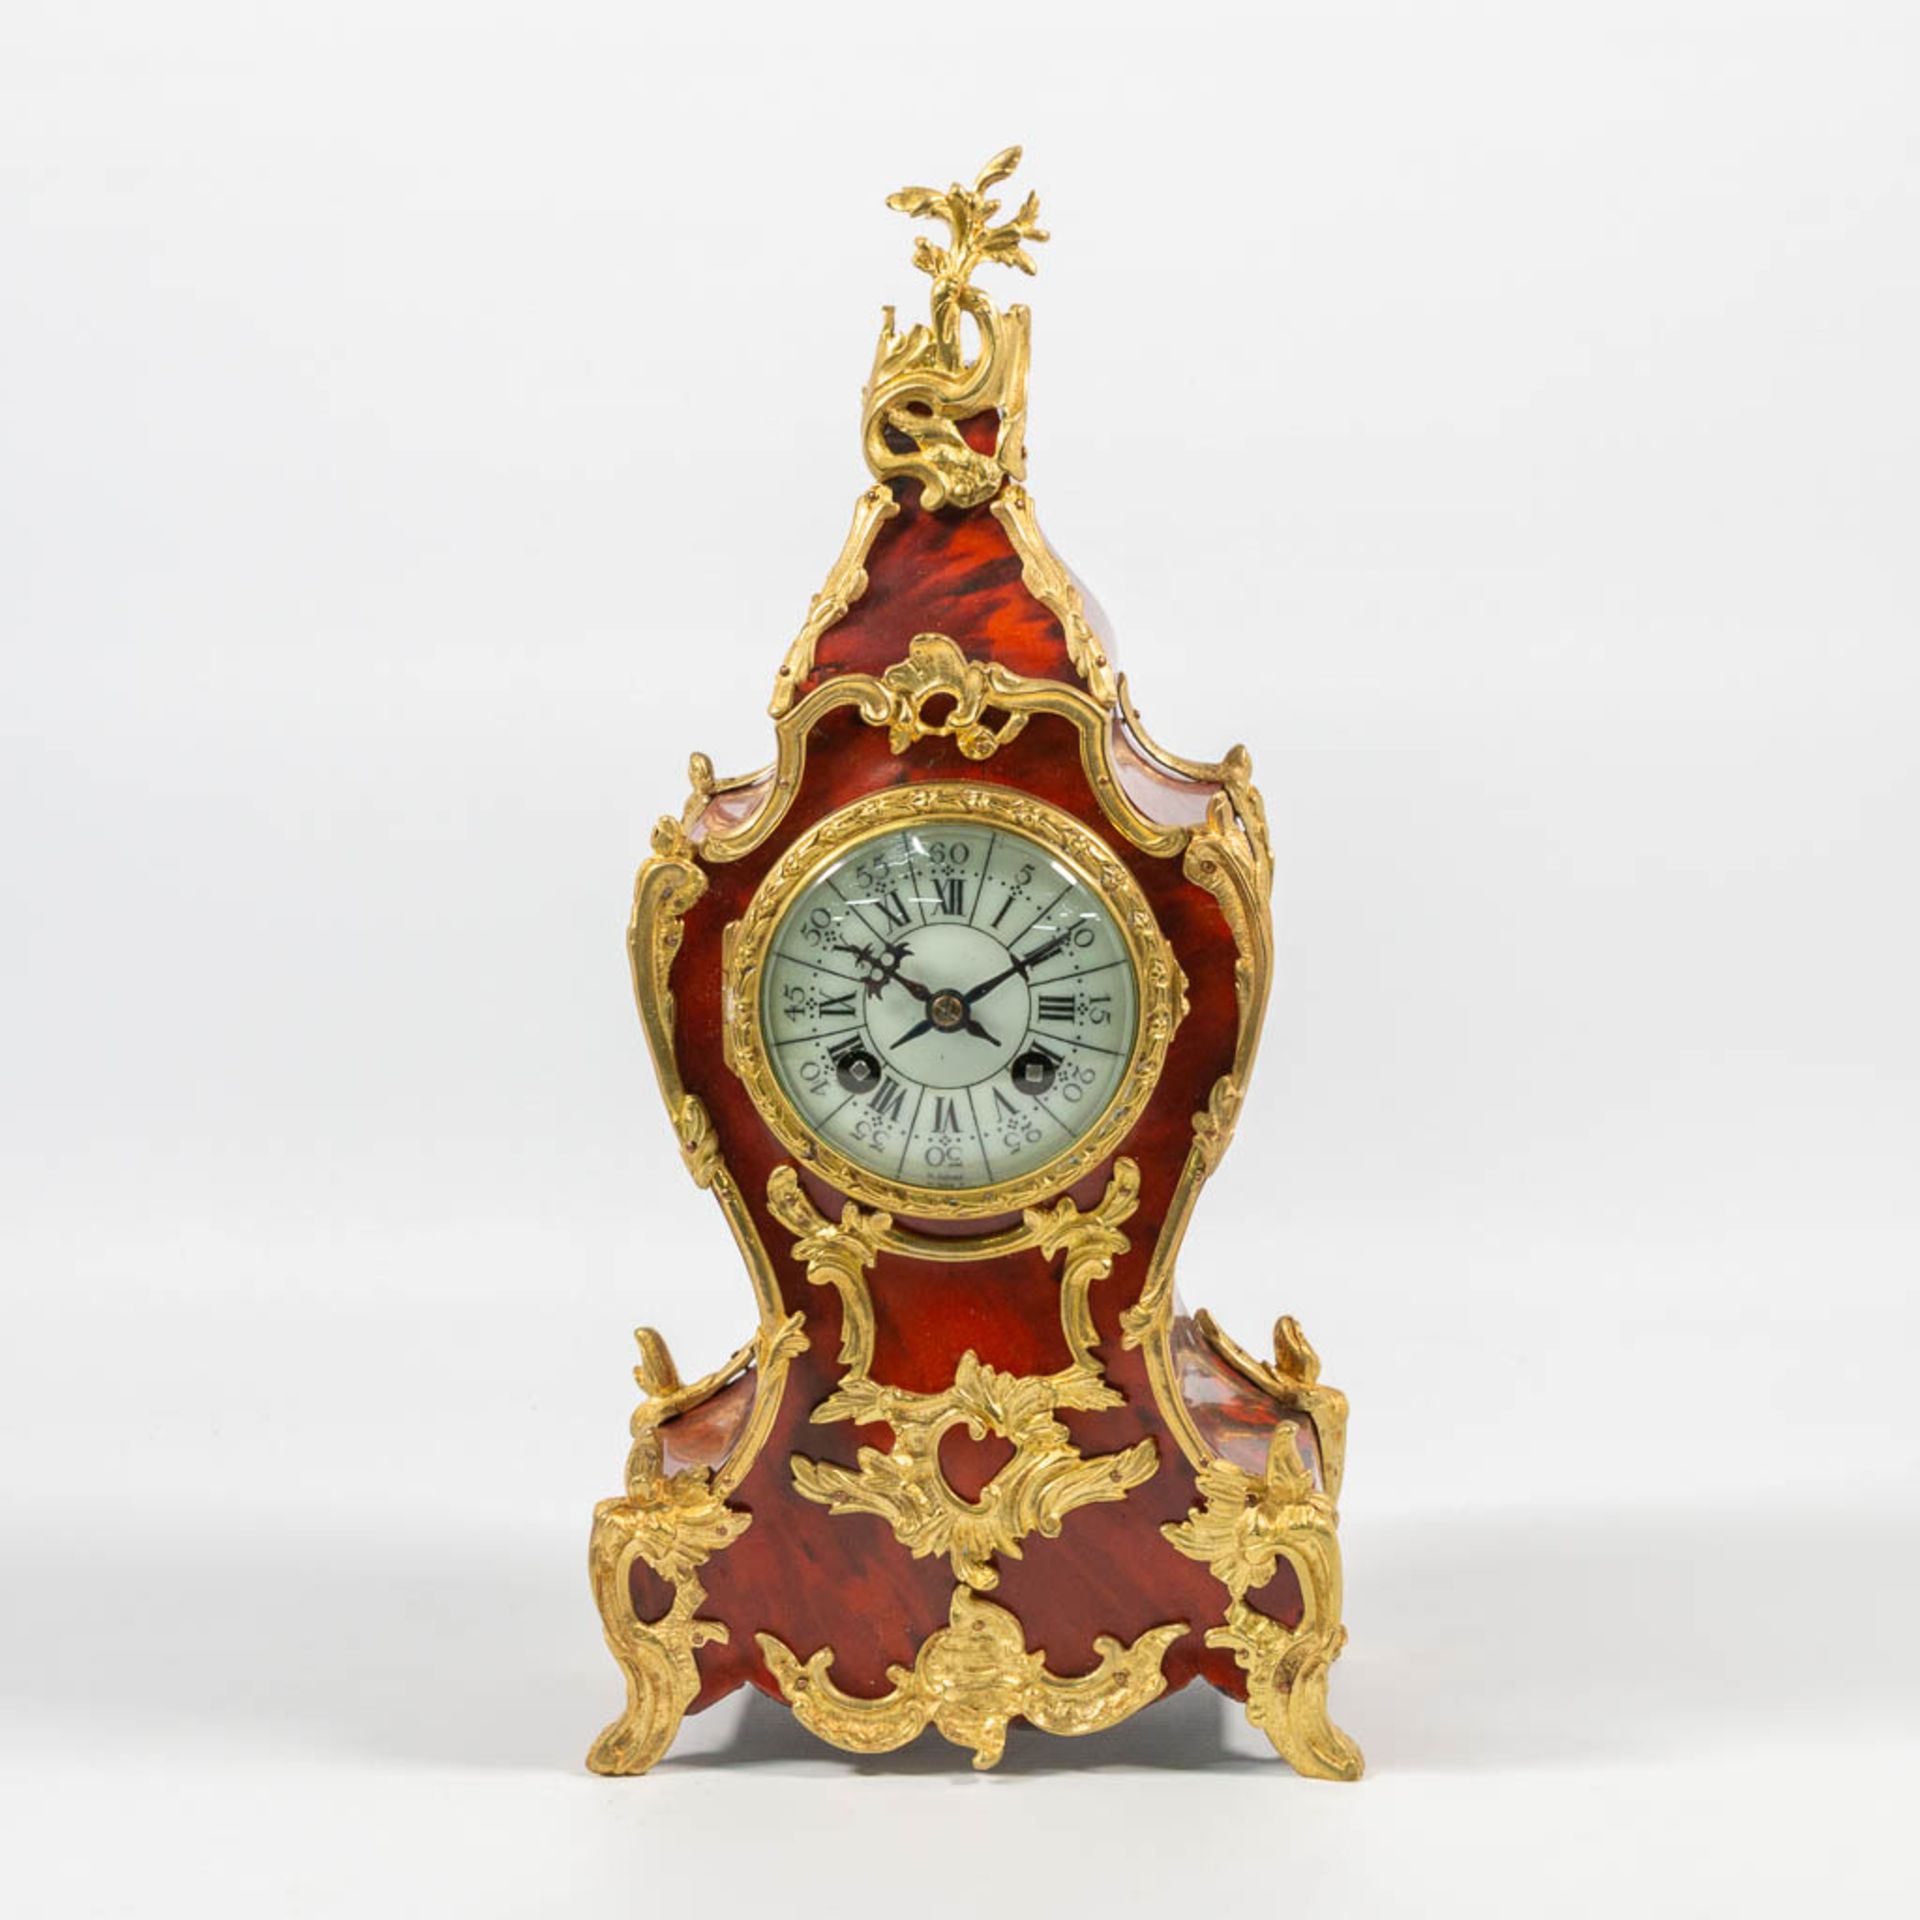 A Table clock made of wood decorated with Tortoise shell and Mount